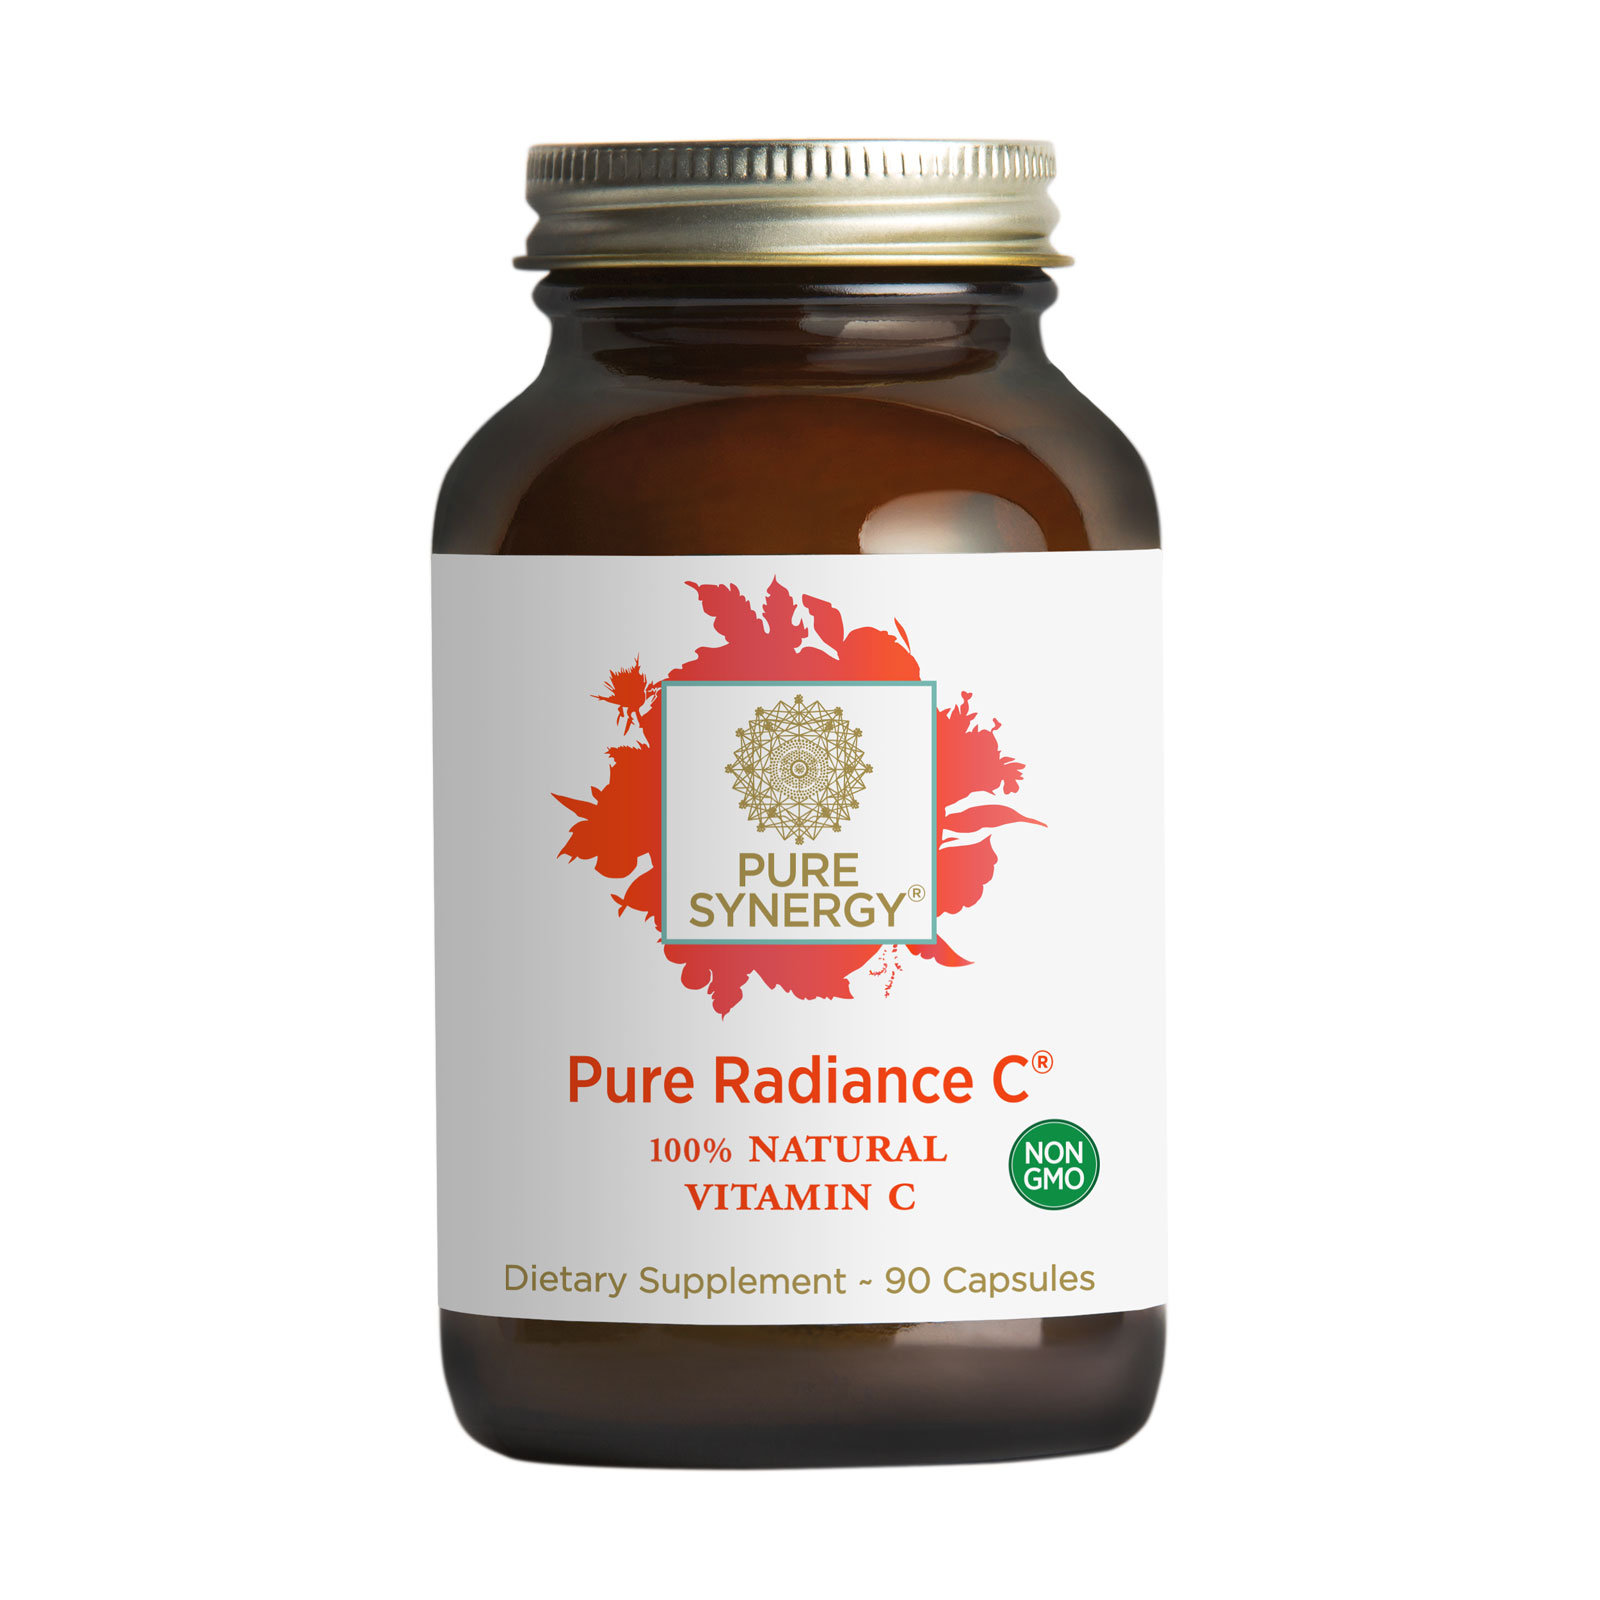 Pure Synergy Pure Radiance Vitamin C Capsules for sale at High Vibe NYC